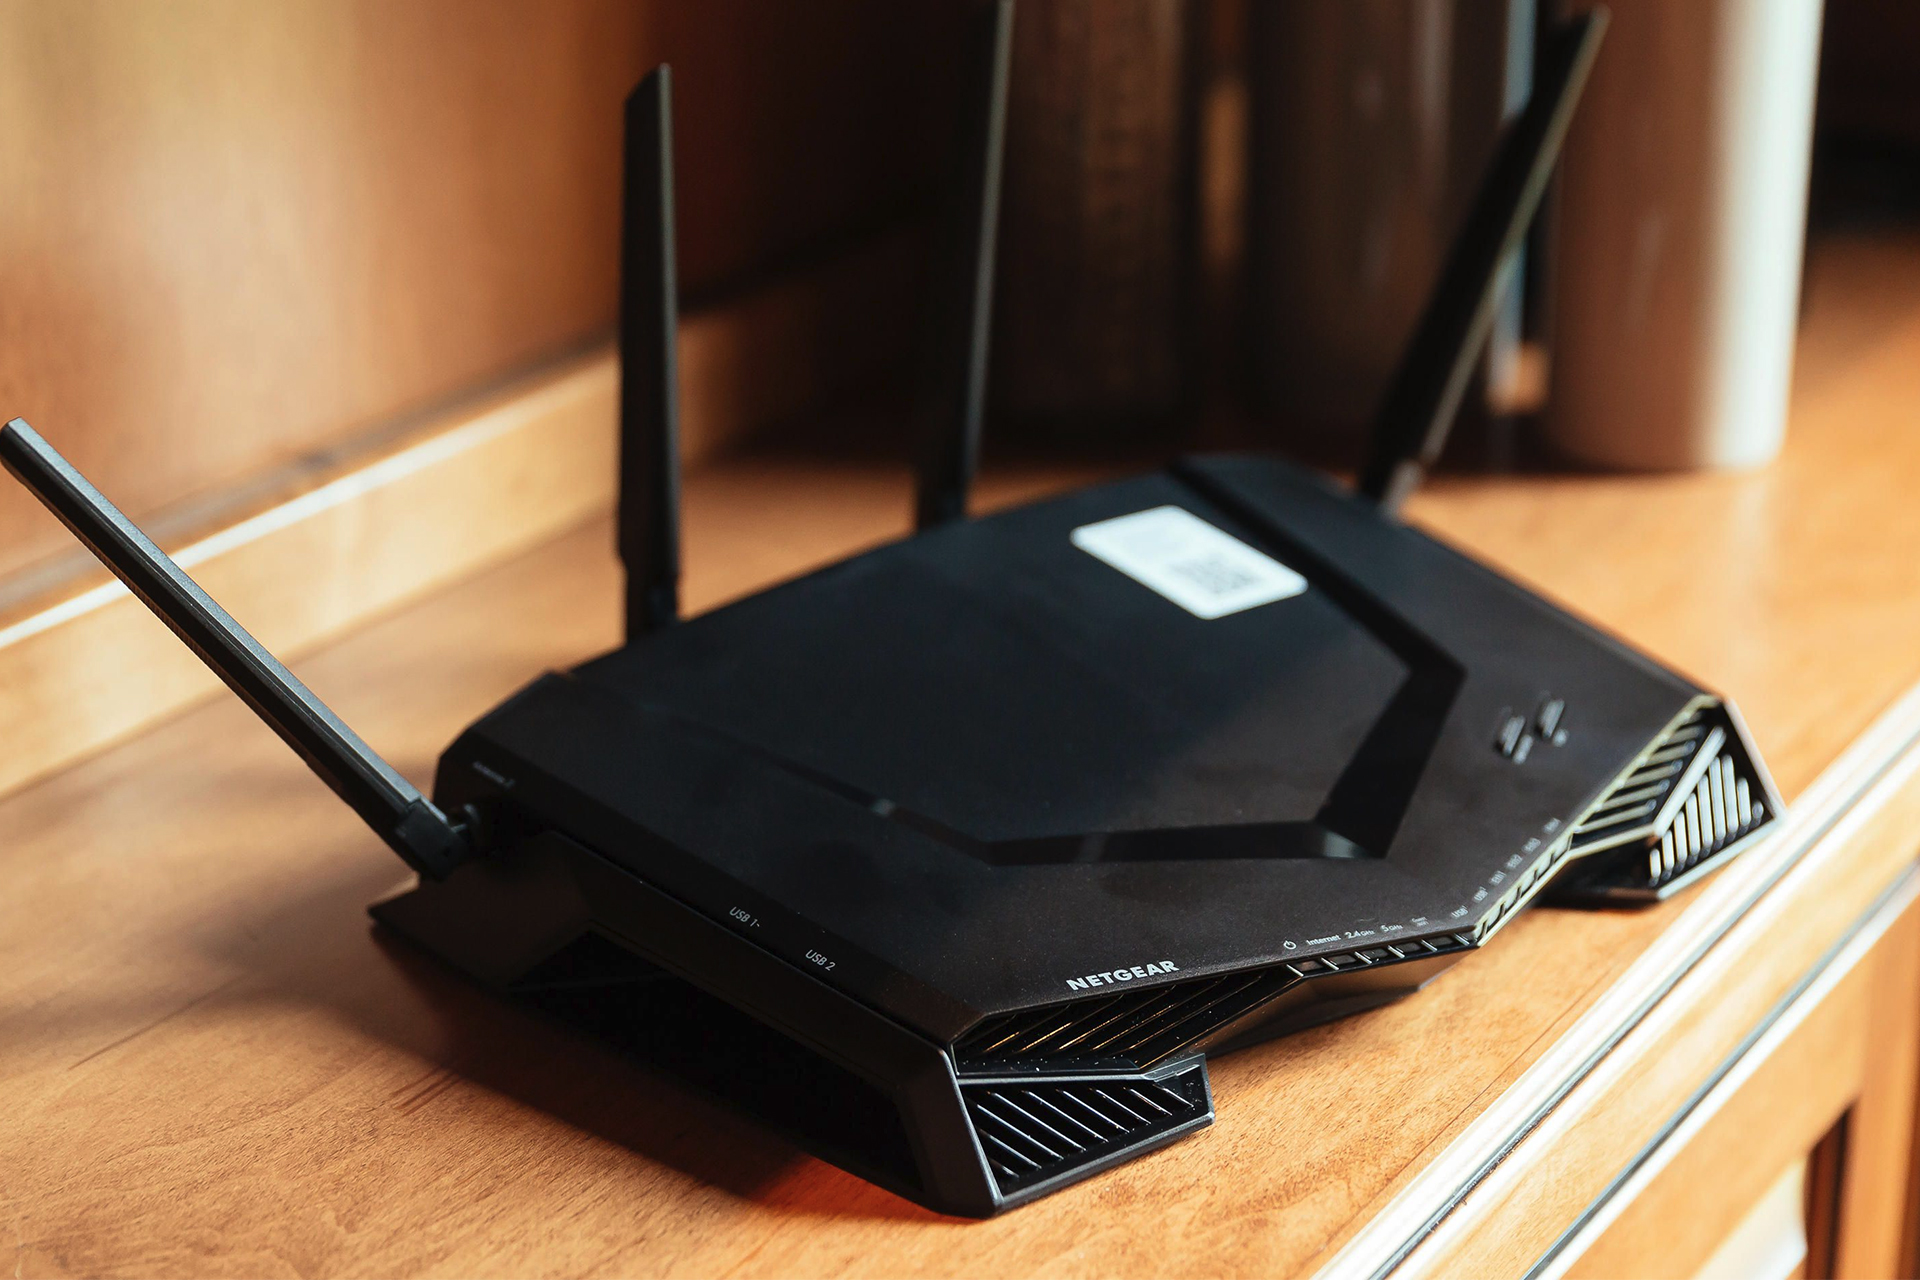 Best Gaming Router: Nighthawk Pro Gaming WiFi Router XR500 - Router